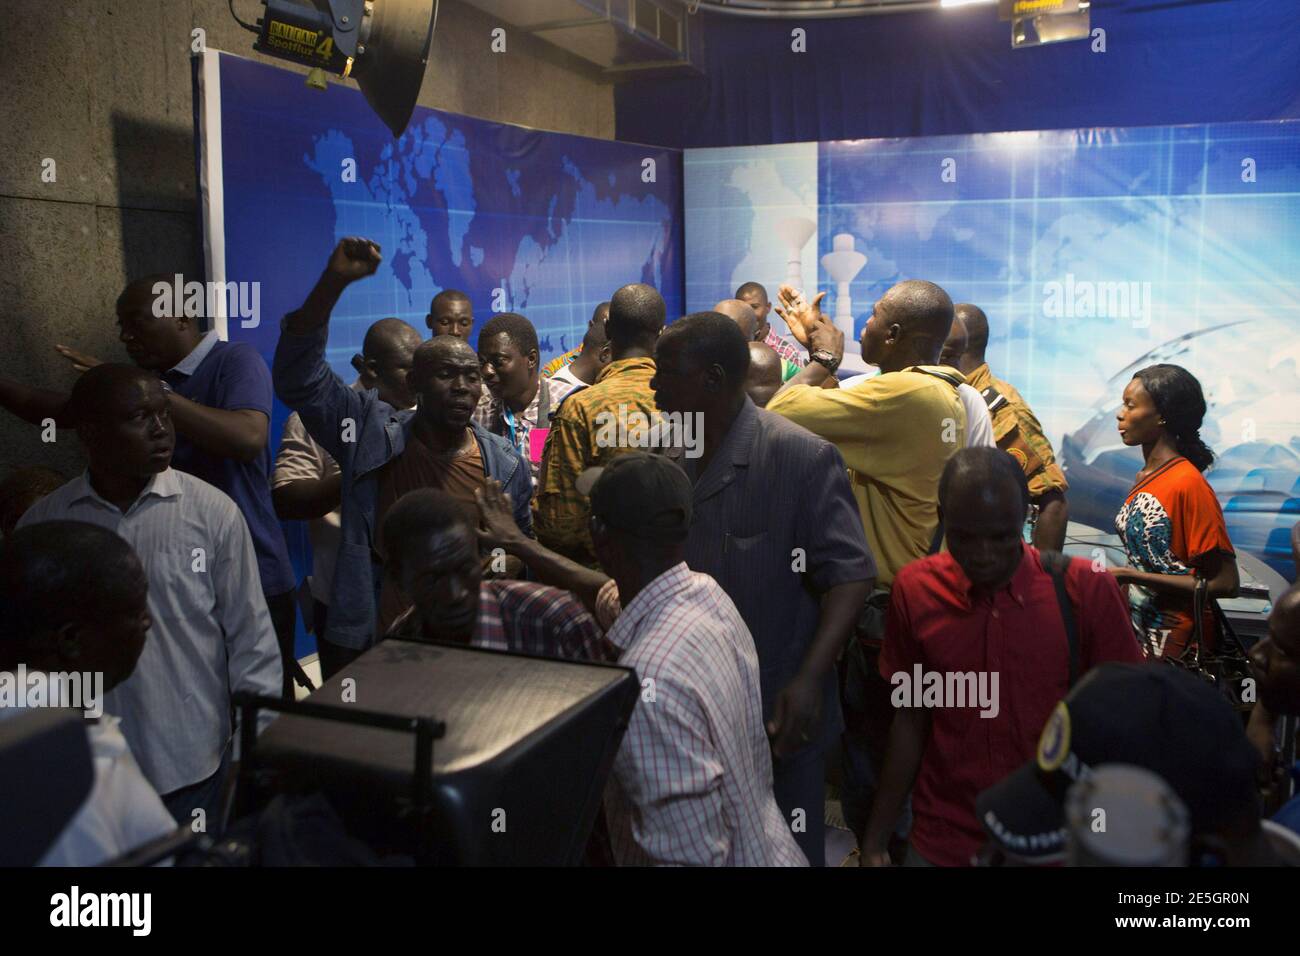 People gather at the podium of the state TV headquarters in Ouagadougou, capital of Burkina Faso, November 2, 2014. Gunfire rang out on Sunday at the headquarters of Burkina Faso's state-run RTB Television as the broadcaster went off air, a Reuters witness said, amid a power struggle following the resignation of long-ruling President Blaise Compaore. The gunshots were fired into the air and there was no immediate sign of injuries. REUTERS/Joe Penney (BURKINA FASO - Tags: POLITICS CIVIL UNREST MEDIA) Stock Photo